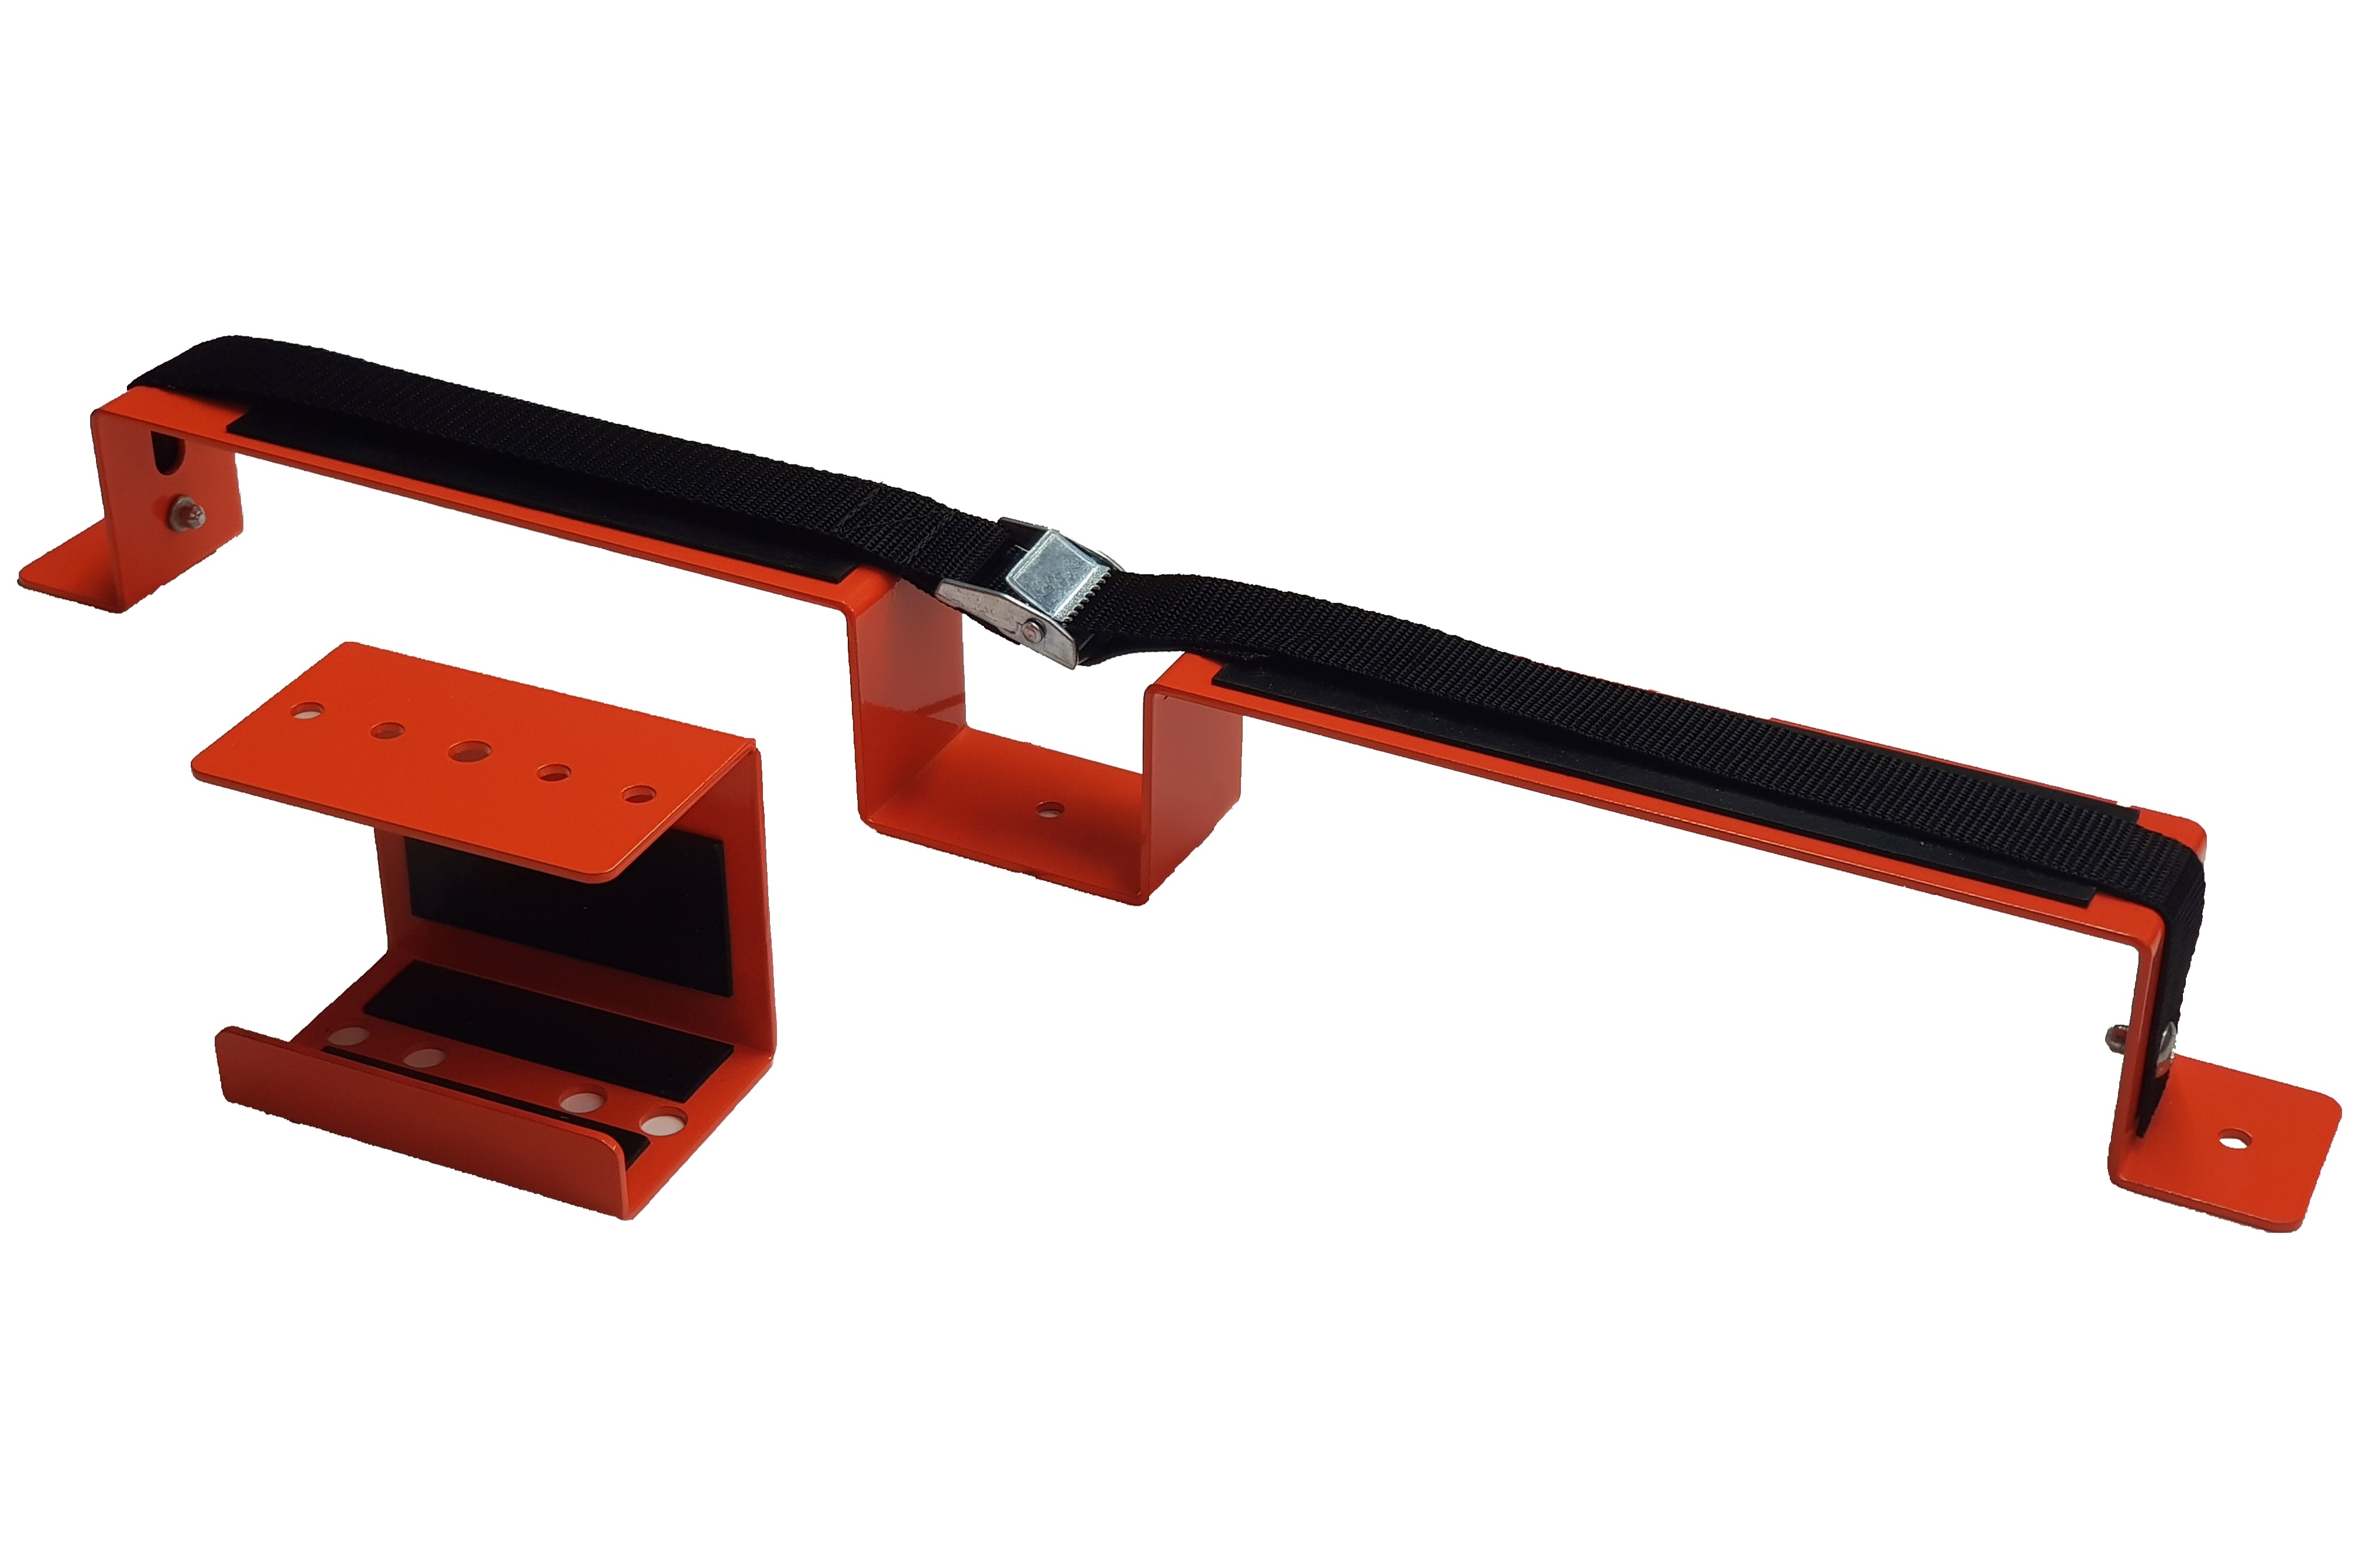 Internal Ladder Holder - Currently out of stock - Available for pre-order.